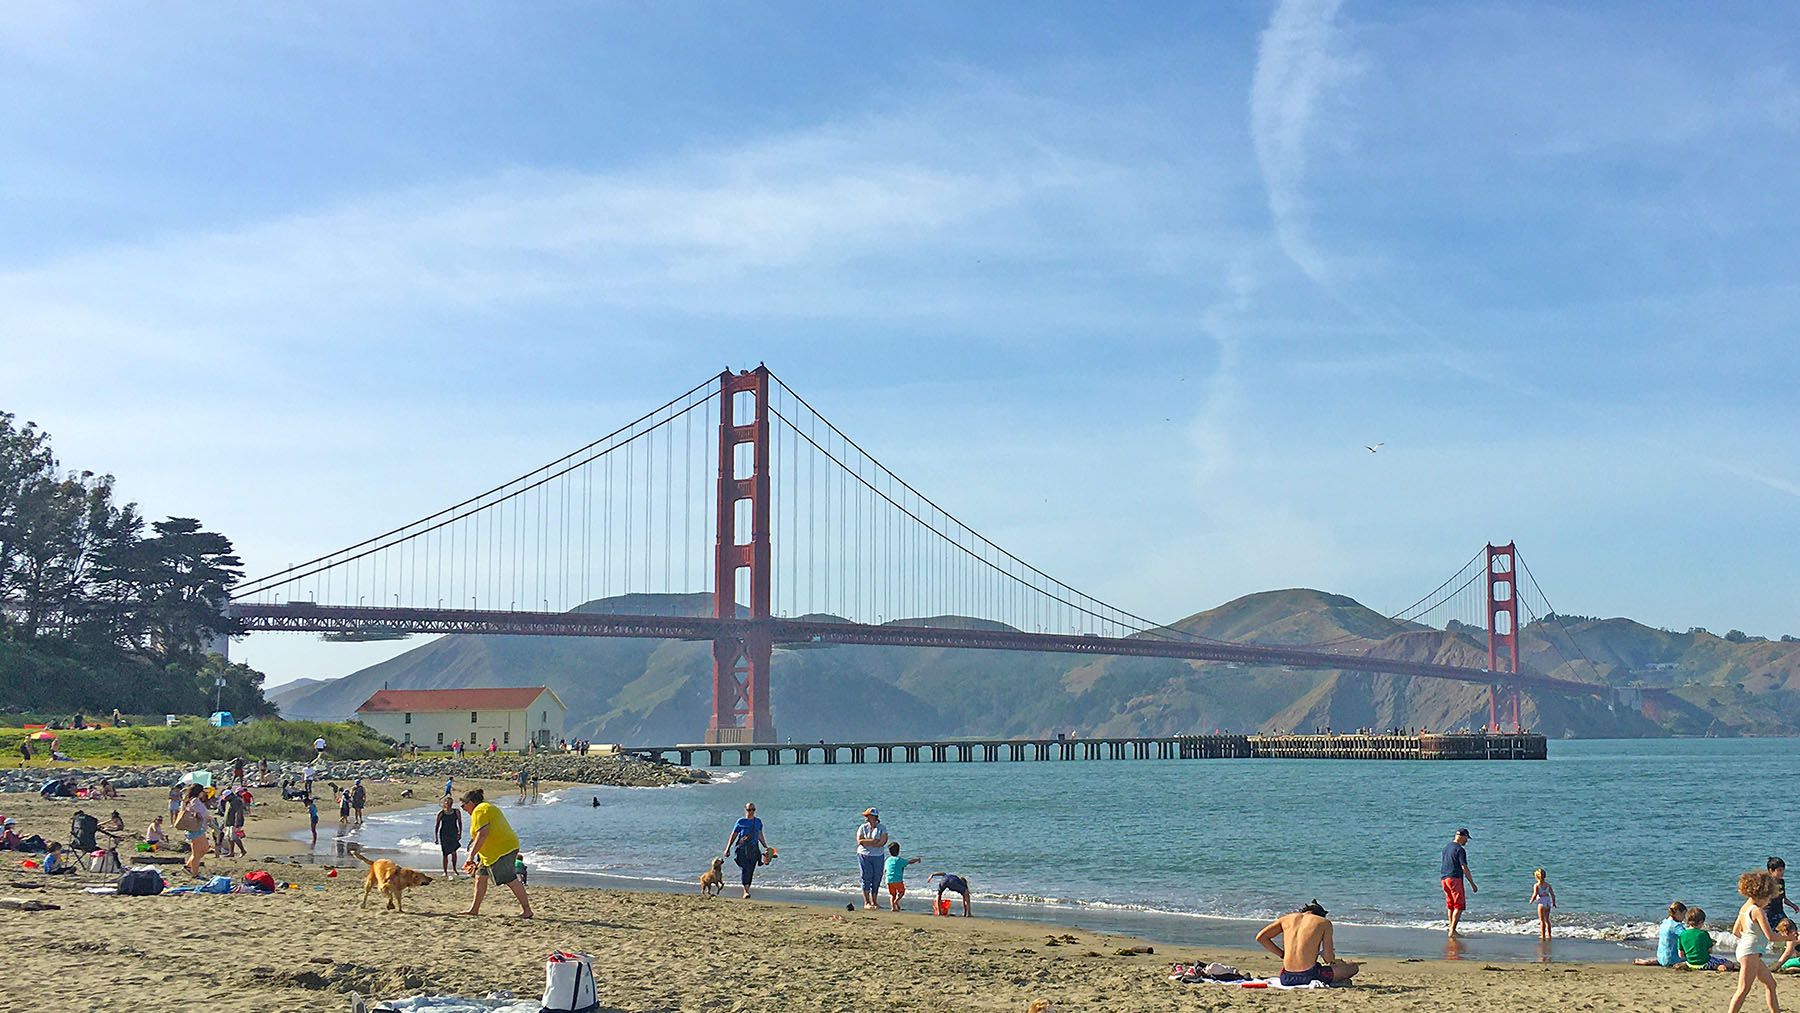 The Golden Gate Bridge. In the far background, rolling green hills, in the foreground, a sandy beach.